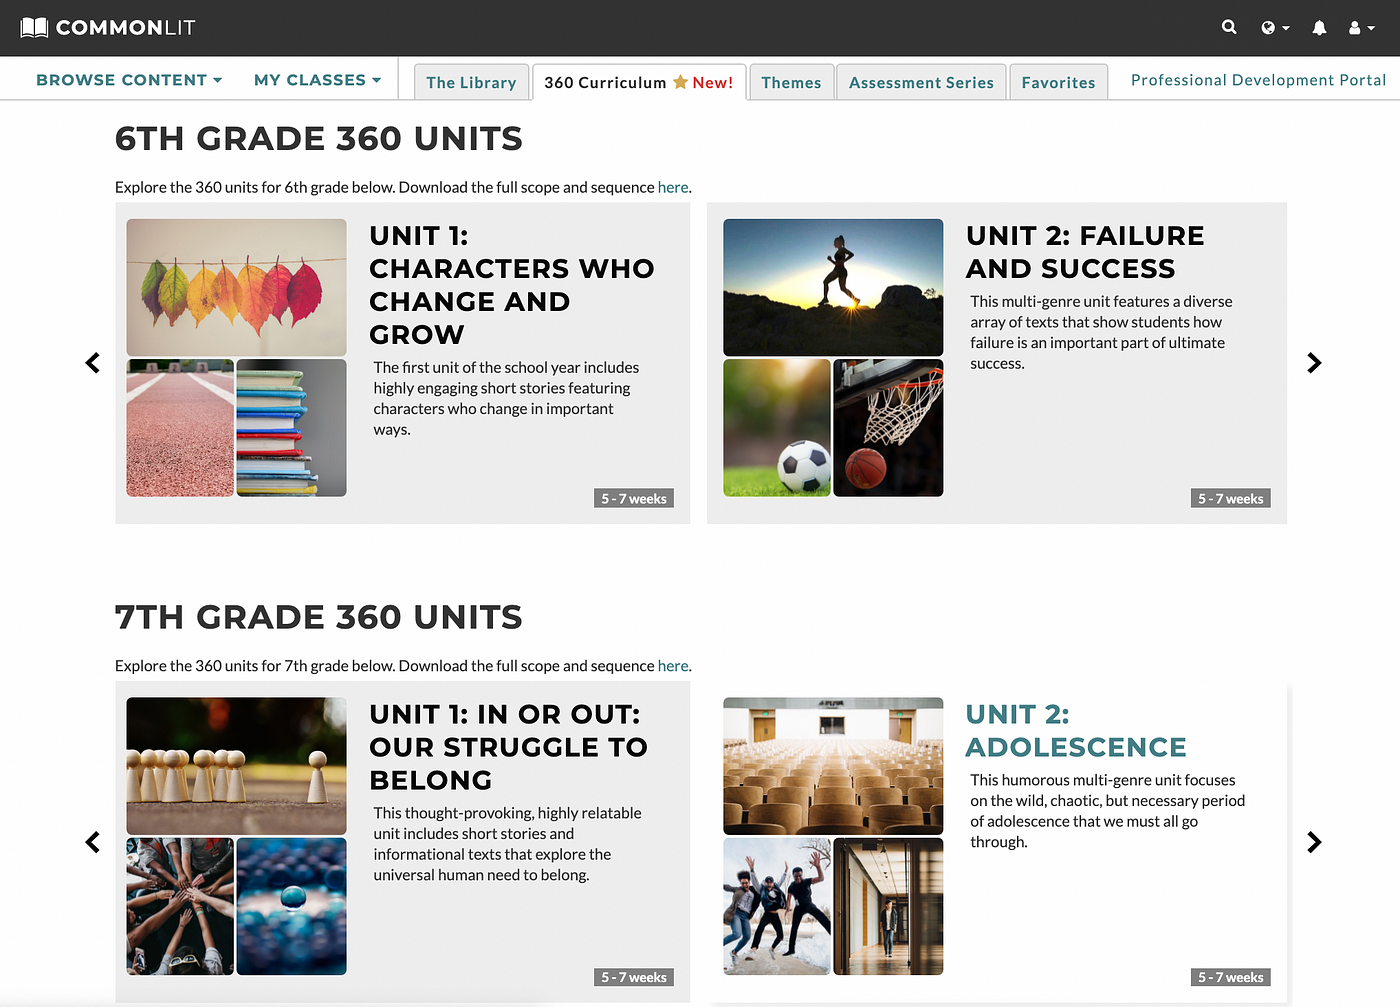 The units page on CommonLit.org shows two 6th grade units (Characters who Change and Grow and Failure and Success) and two 7th grade units (In Or Out: Our Struggle to Belong and Adolescence). Arrows indicate there are more units to explore.